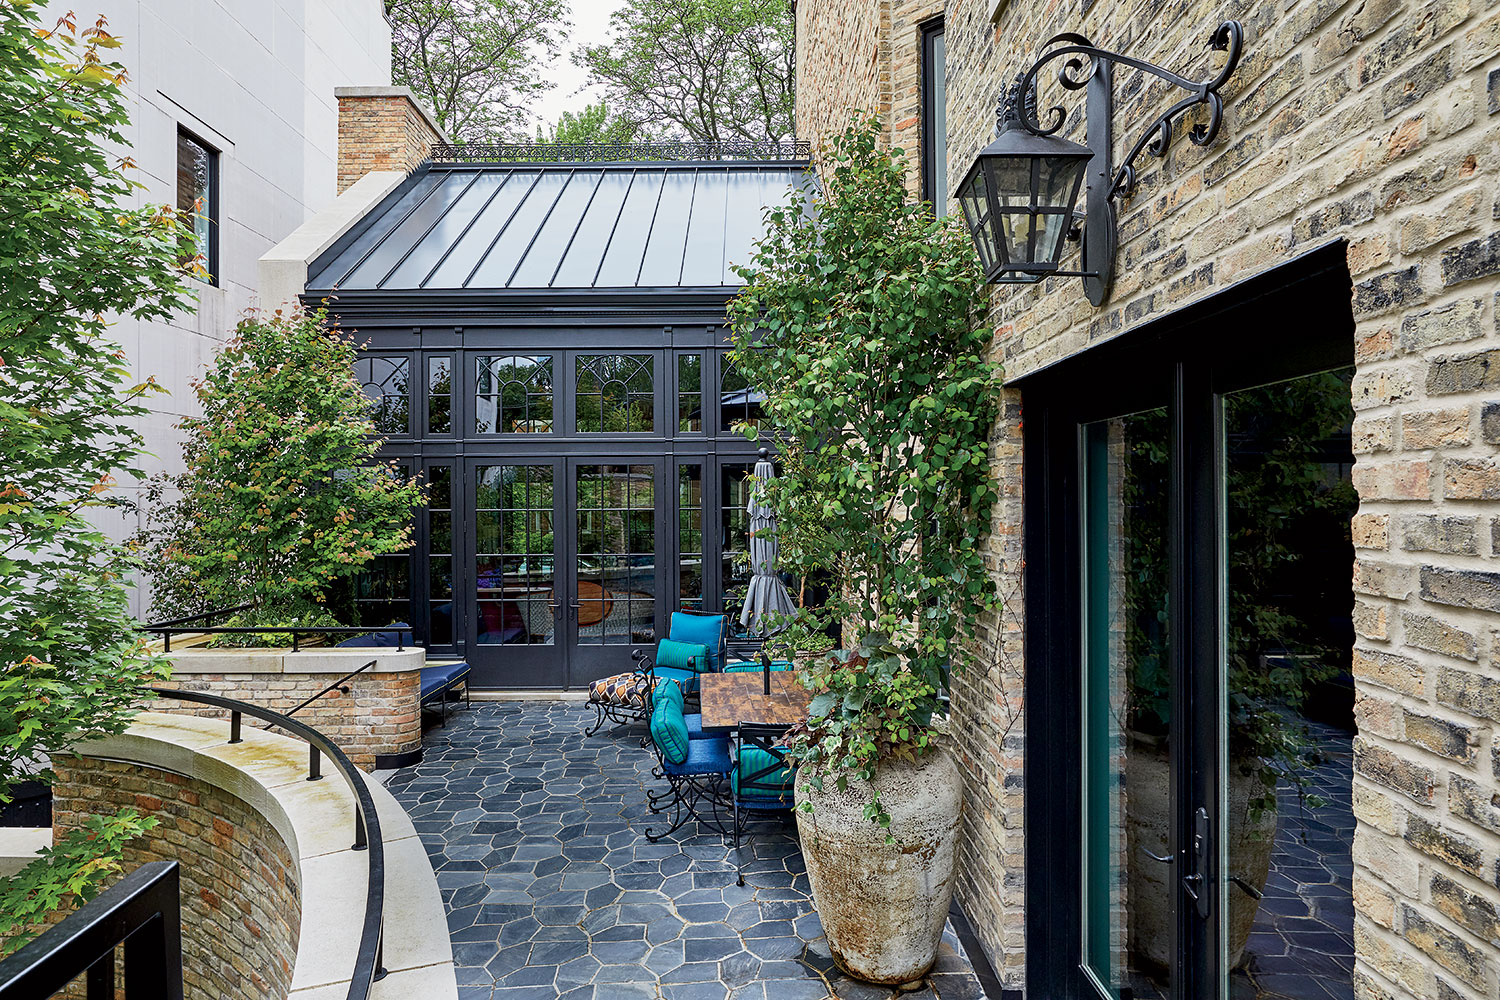 Steel, stone, and brick help the new conservatory match the home’s original 19th-century character.